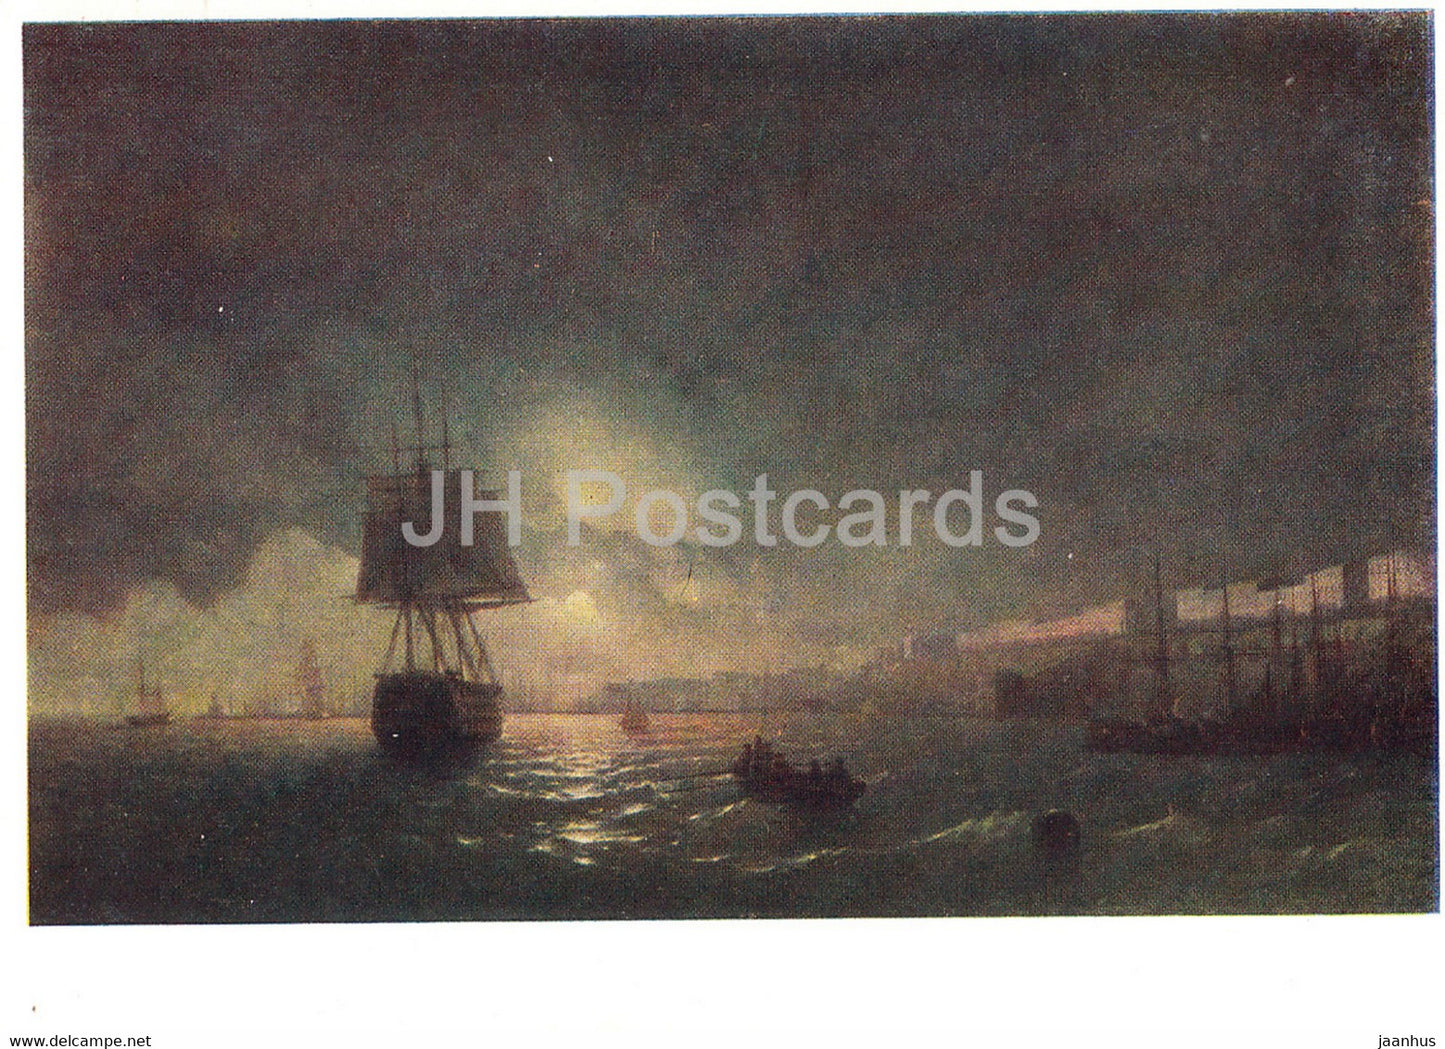 painting by Ivan Aivazovsky - Odessa at Moonlight night - sailing ship - 1 - Russian art - 1962 - Russia USSR - unused - JH Postcards